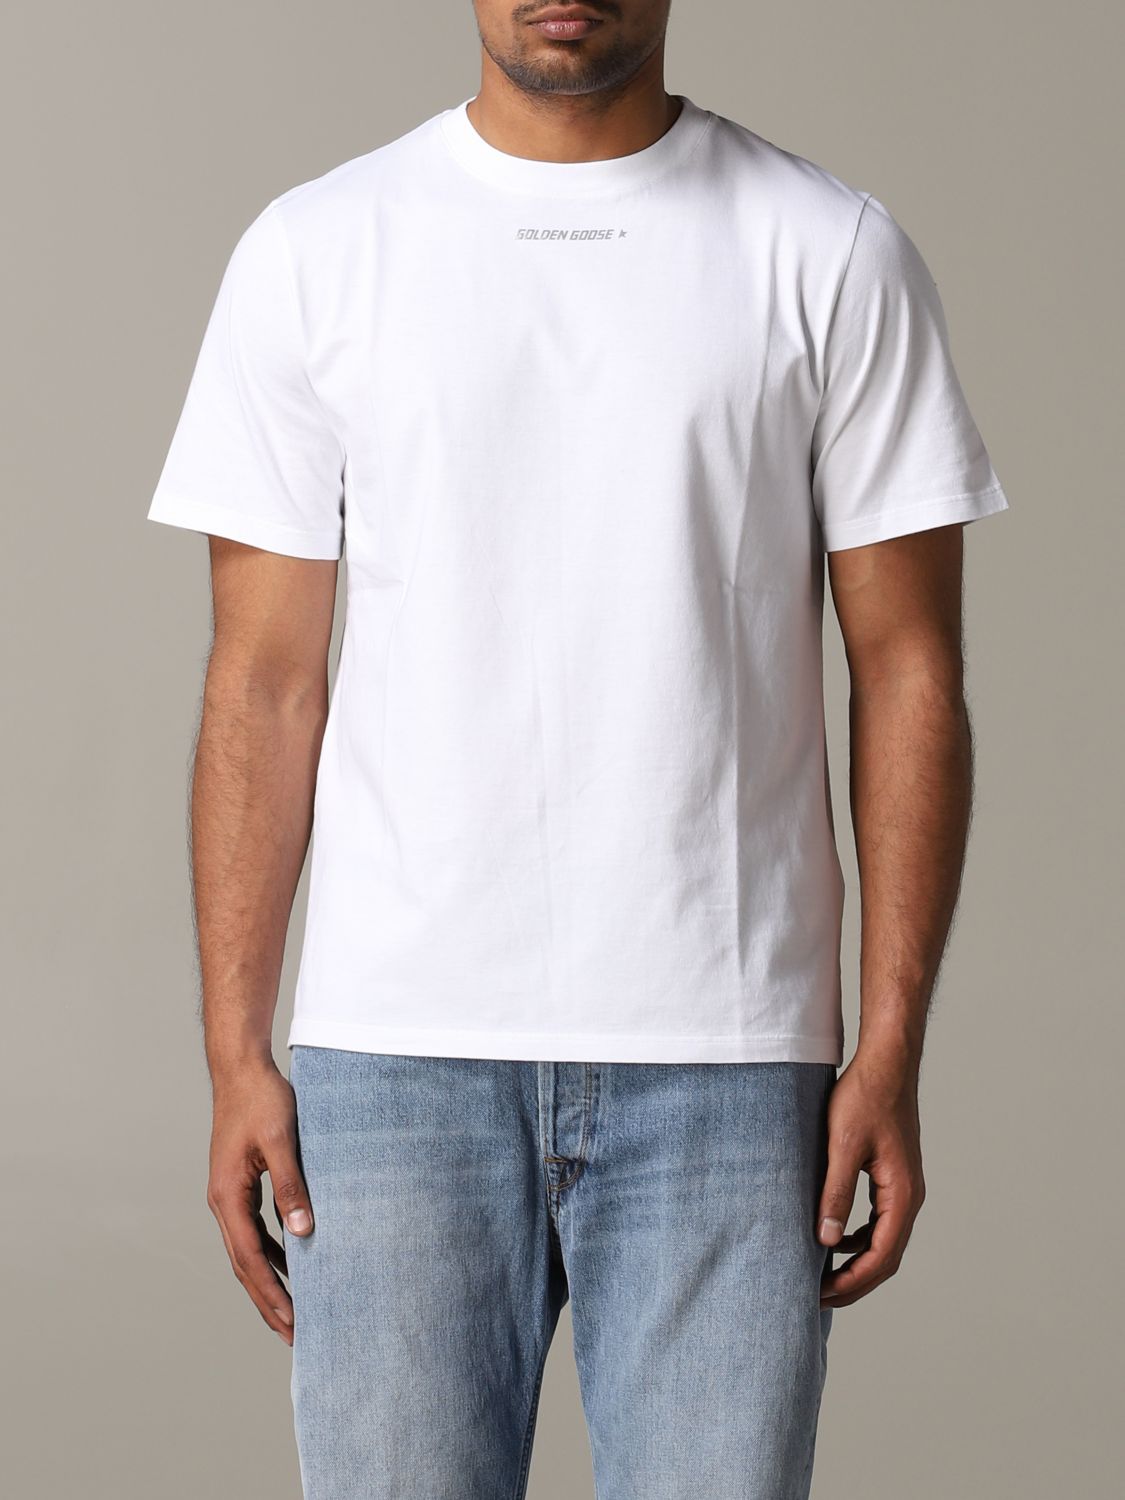 Golden Goose Outlet: short-sleeved T-shirt with logo - White | Golden Goose t-shirt G36MP524 F1 on GIGLIO.COM